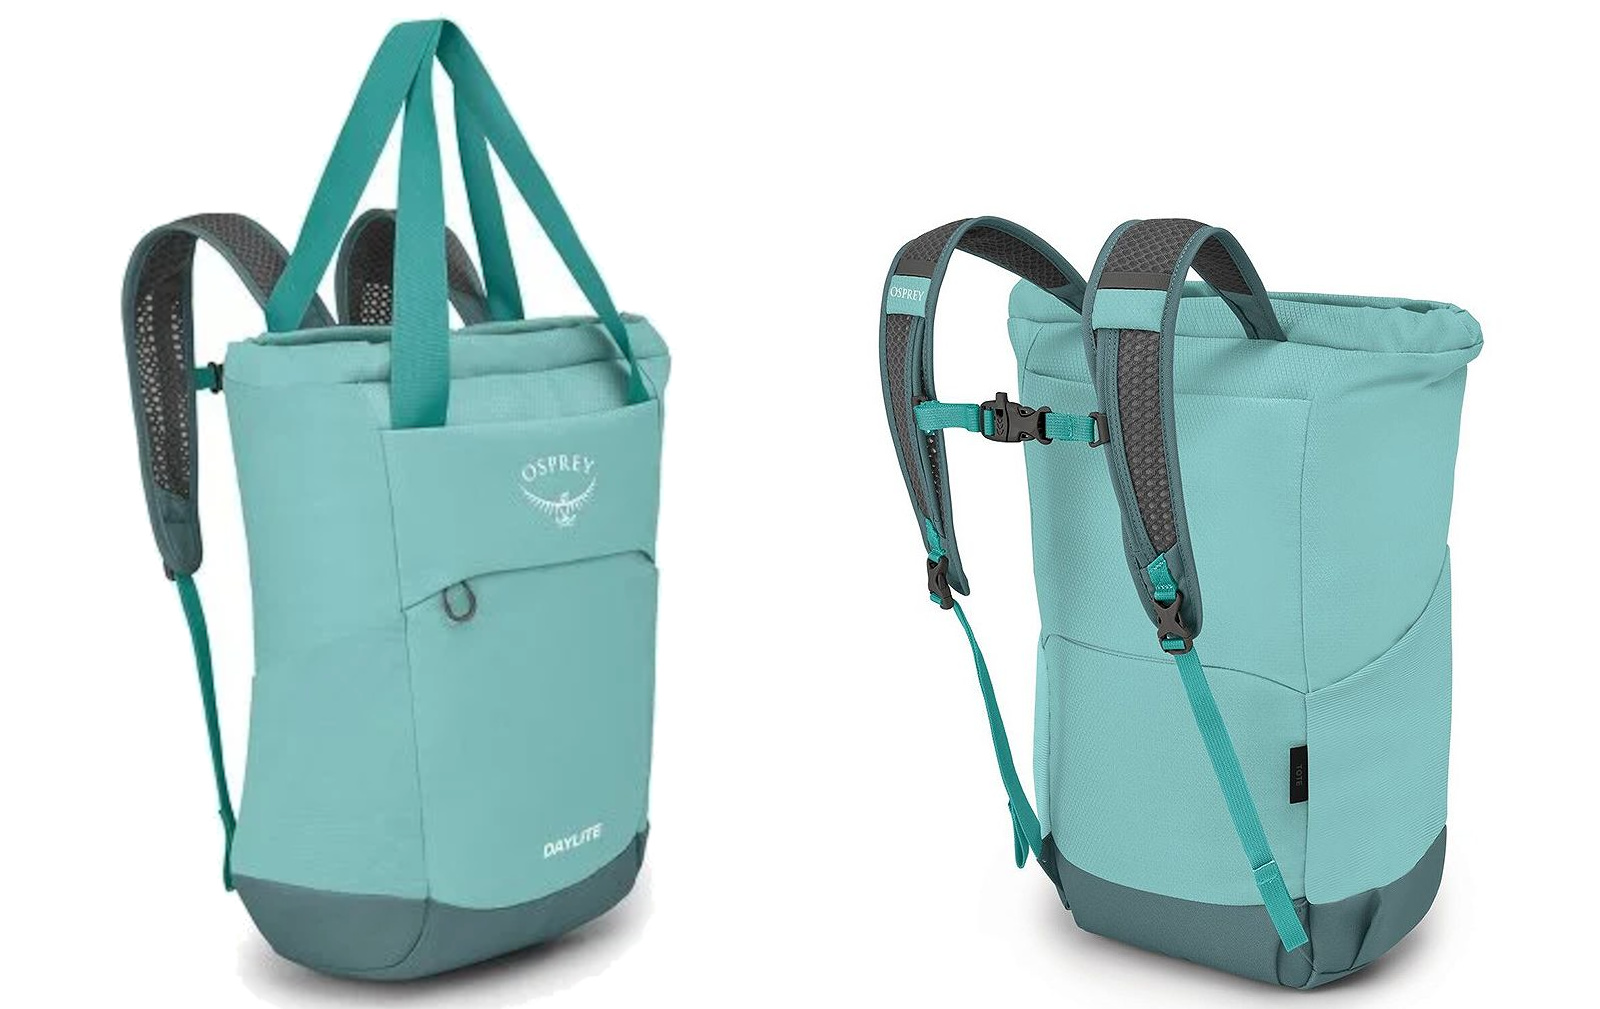 <p>The Daylite Tote is more than just a tote - it’s a true backpack that can be carried in multiple configurations. For long hauls, the backpack straps let you carry the load, while the tote mode is more accessible for hitting the market or other errands.</p> <p>The pack fits a reservoir and most laptops and has side mesh pockets for water bottles, a secure front panel zipper pocket, and even a luggage pass-thru backpanel. Osprey uses Bluesign-approved recycled fabrics and a PFC-free DWR coating.</p> <a class="buy-now single" href="https://osprey.pxf.io/c/381569/1765694/20745?subId1=gjsposprey4thq224&u=https%3A%2F%2Fwww.osprey.com%2Fdaylite-tote-pack-daylttotpks21-779%3Fcolor%3DJetstream%252520blue%252520Cascade%252520Blue">Shop Now</a>